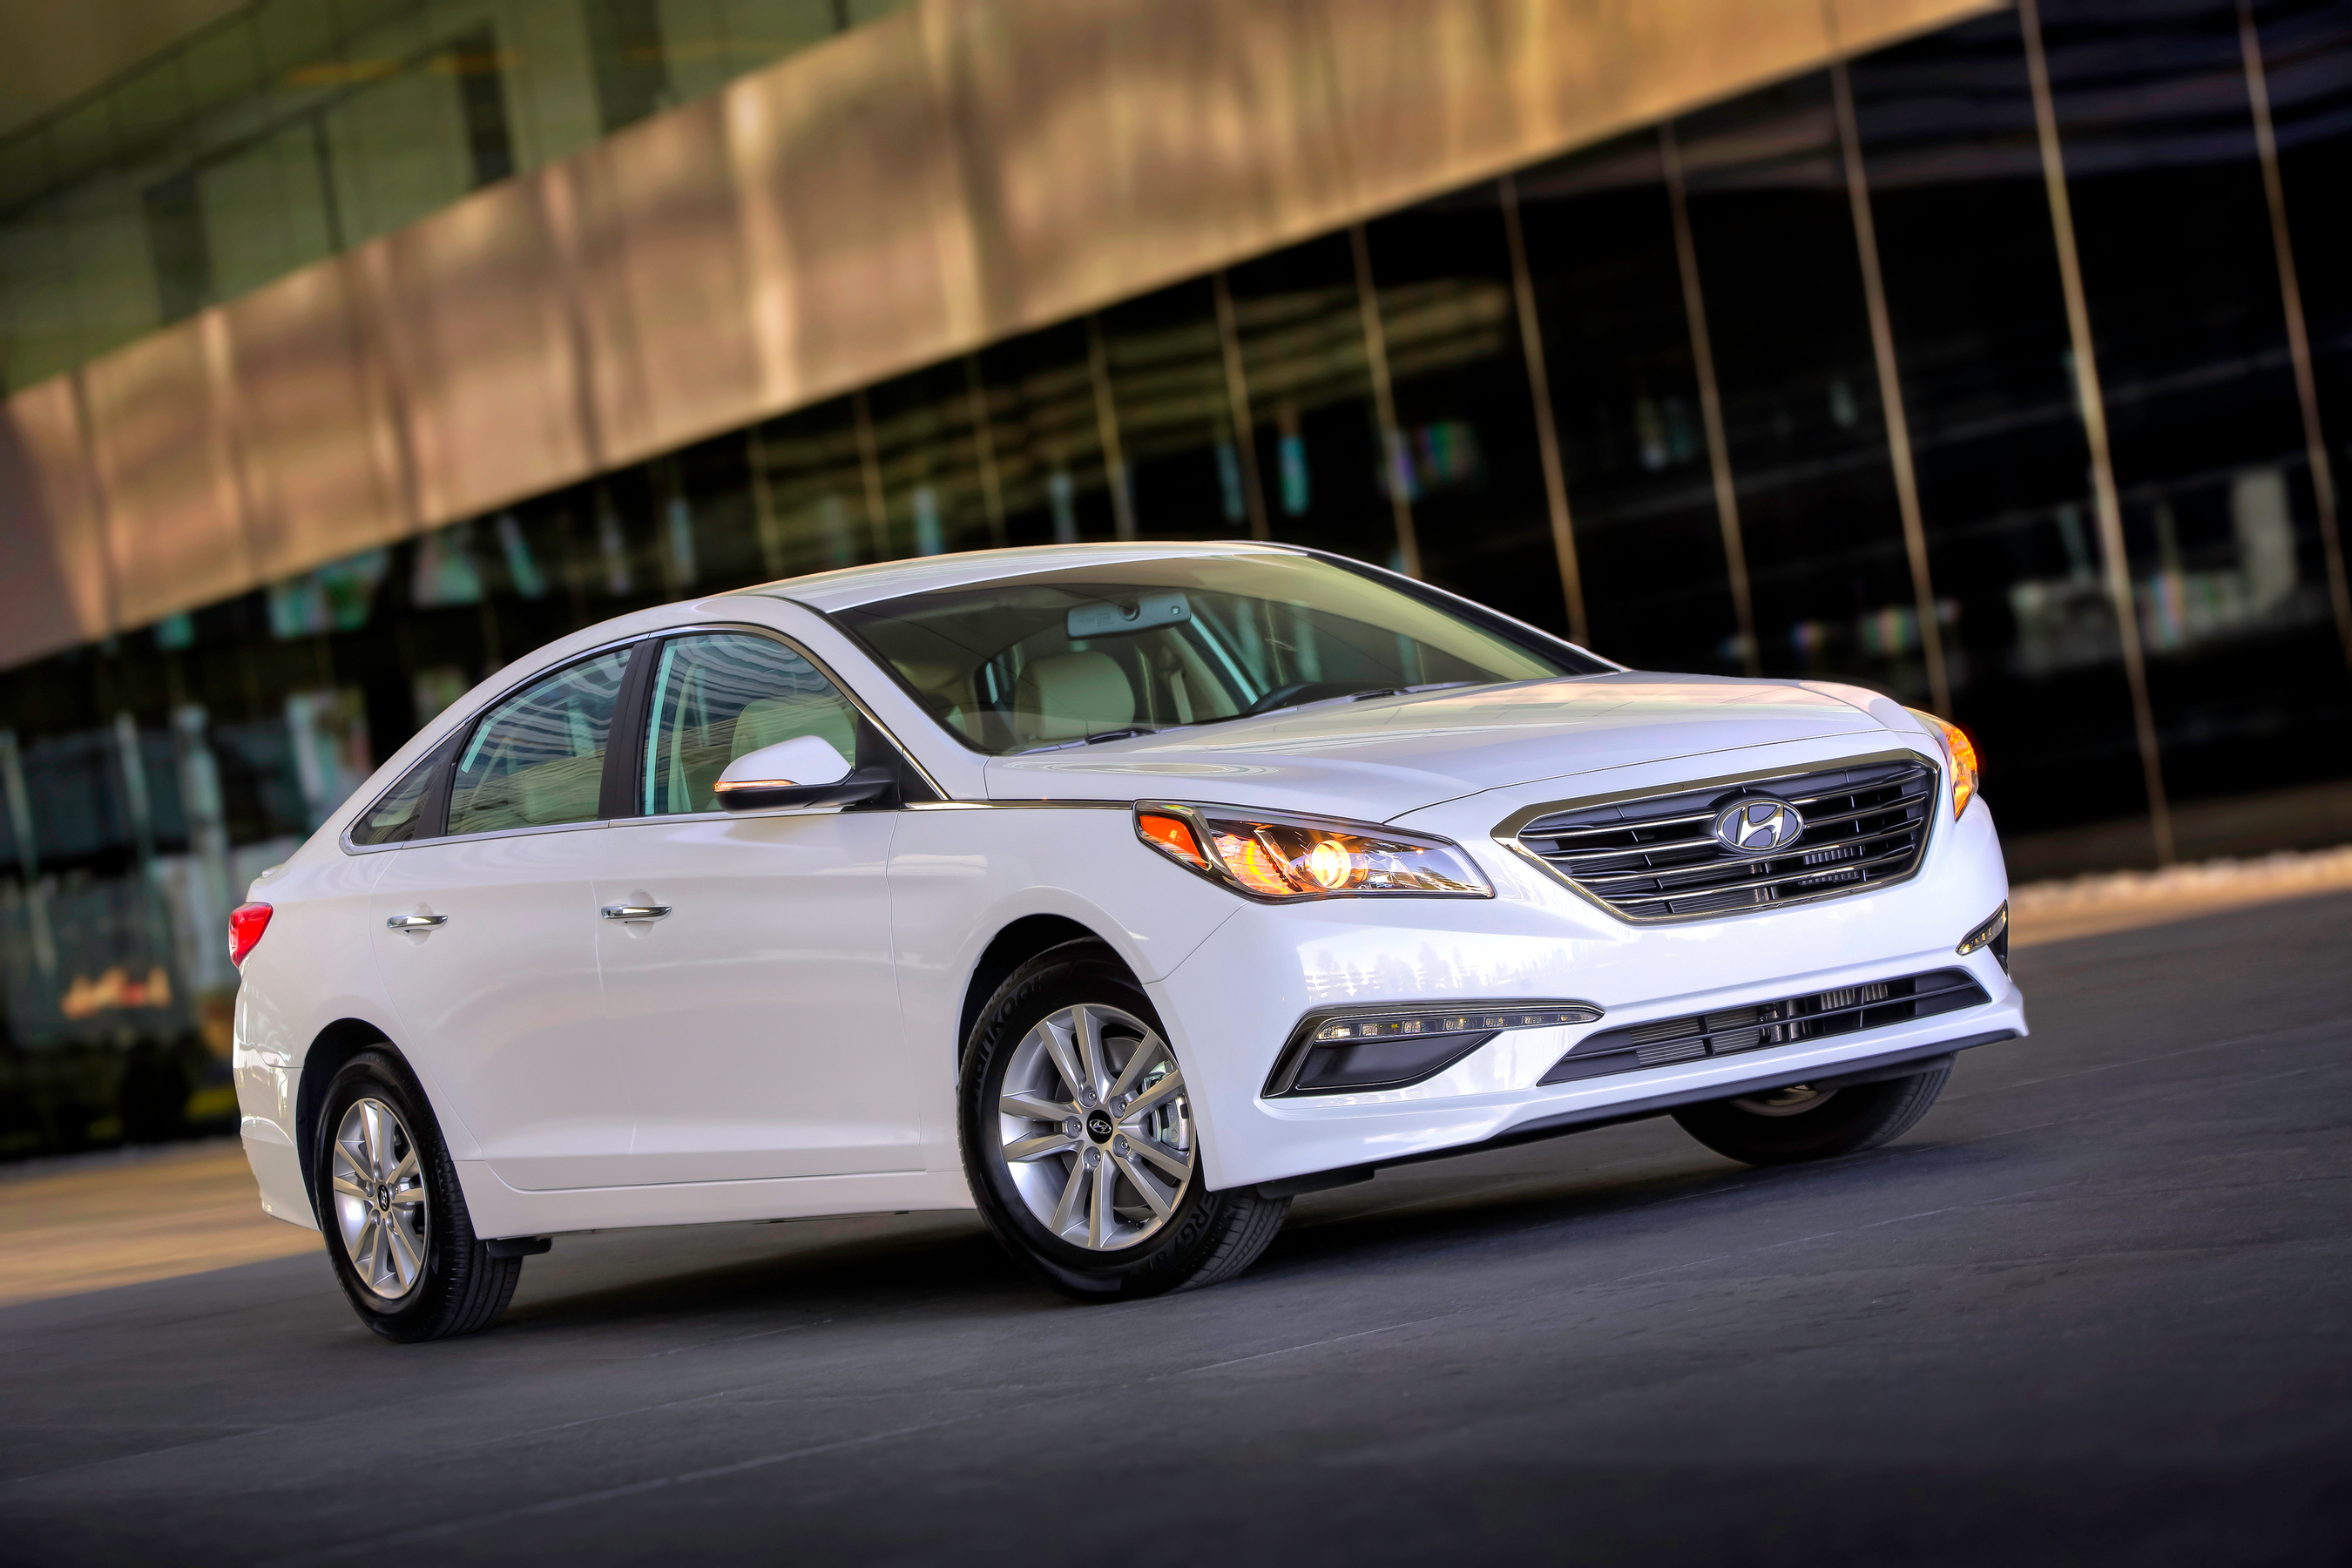 2015 Sonata Eco Delivers Estimated 32 MPG Combined Fuel Economy And Premium Driving Experience